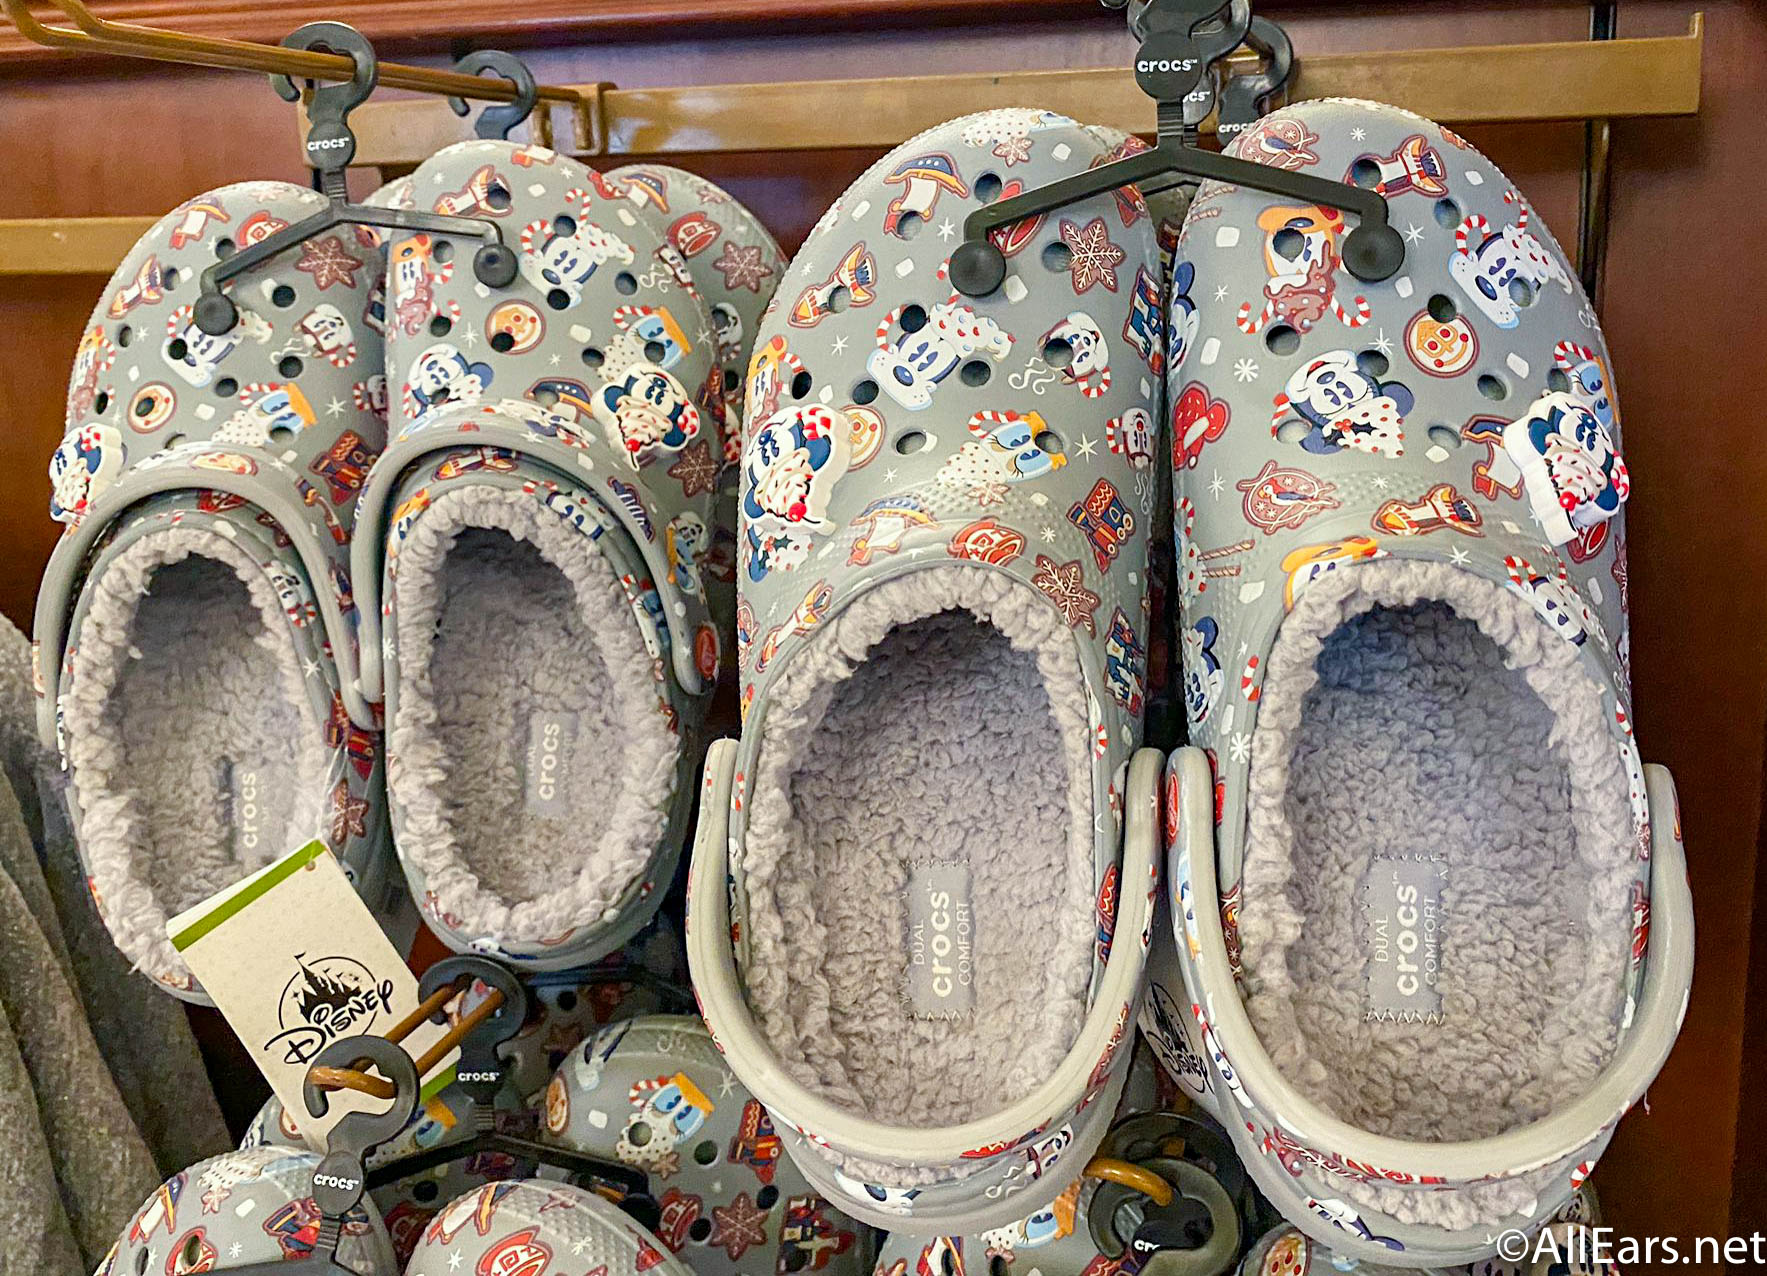 PHOTOS: Disney World's NEW Holiday Crocs Have It ALL! - AllEars.Net